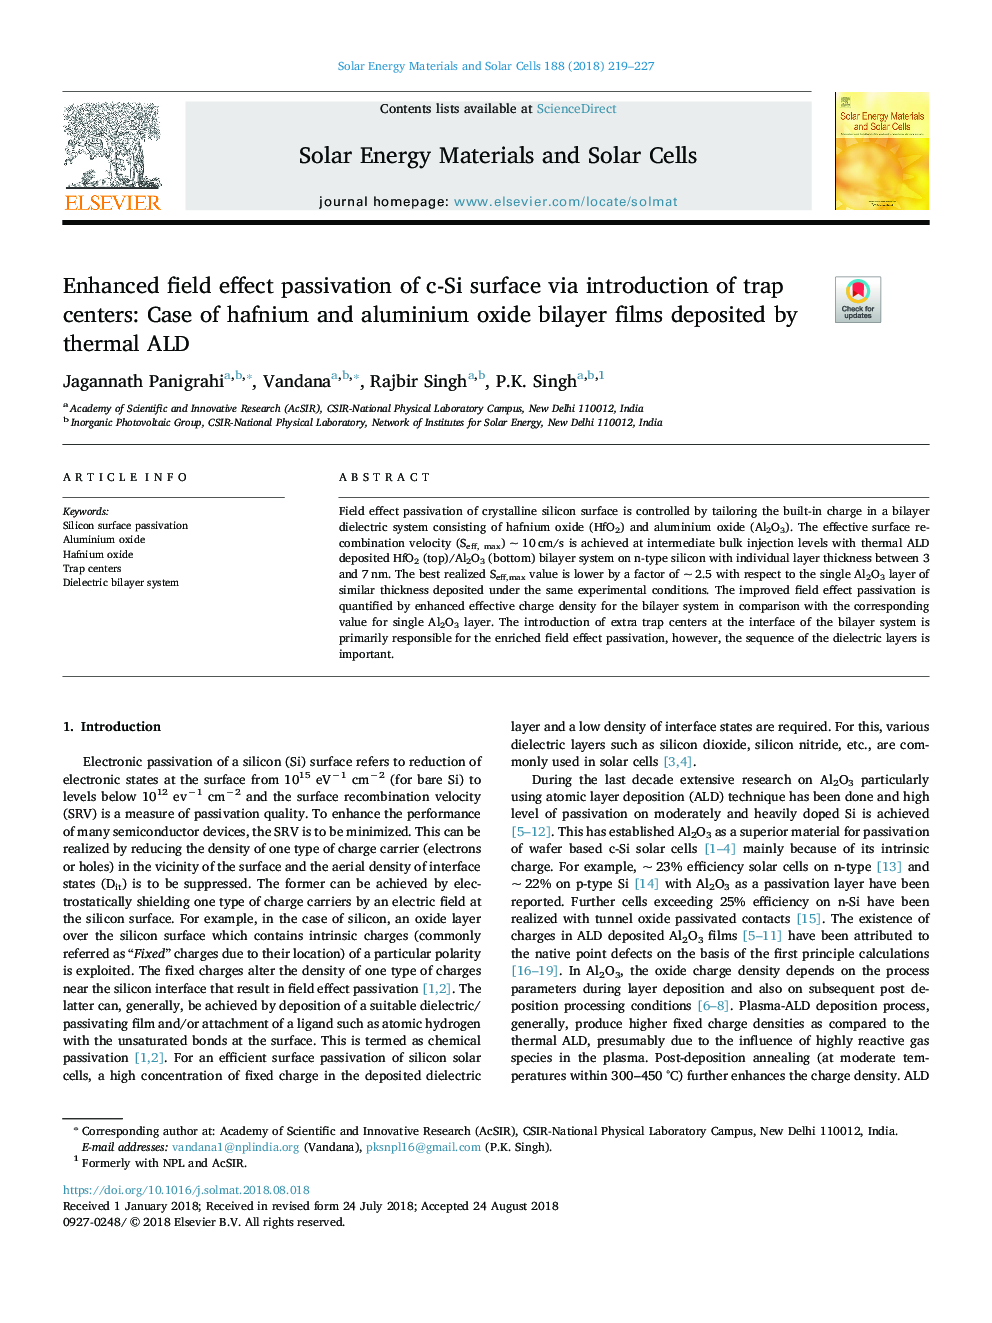 Enhanced field effect passivation of c-Si surface via introduction of trap centers: Case of hafnium and aluminium oxide bilayer films deposited by thermal ALD